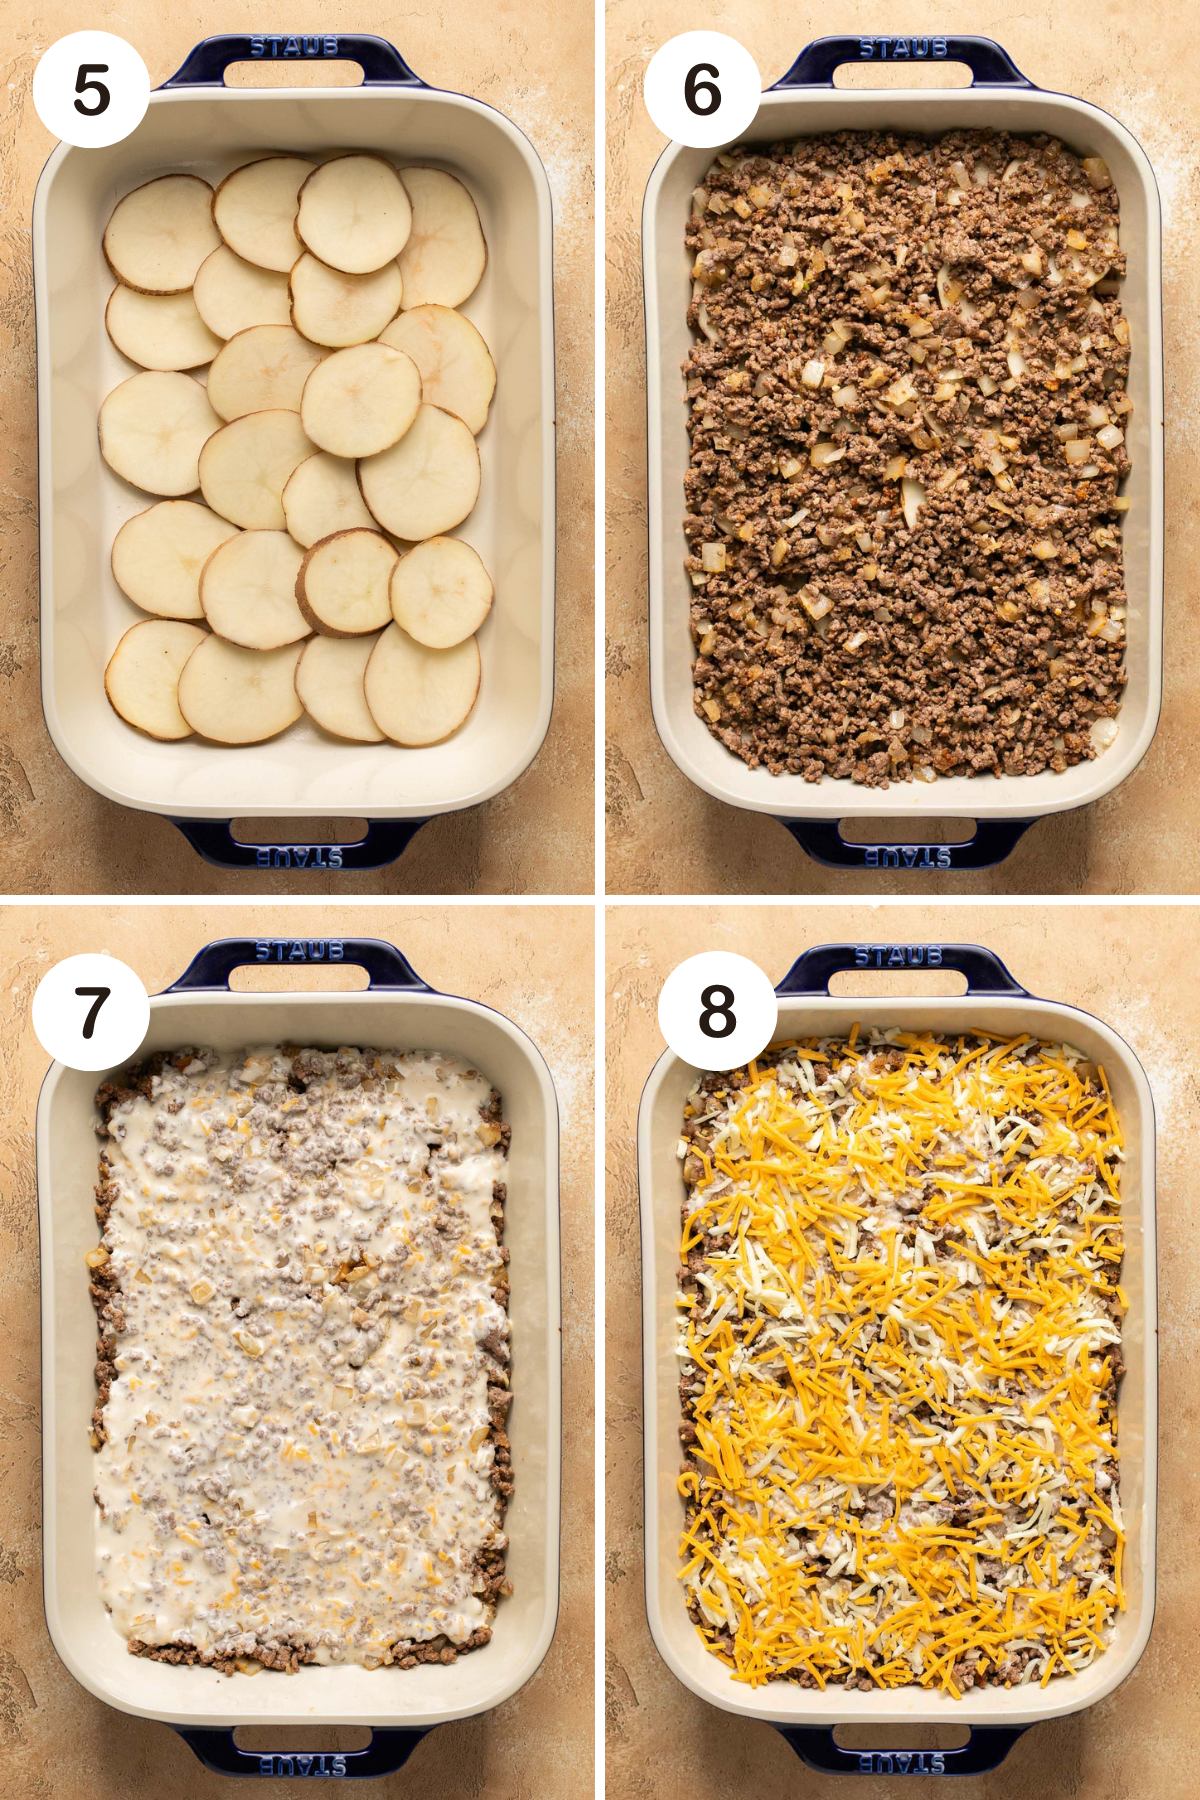 photos showing how to assemble the casserole